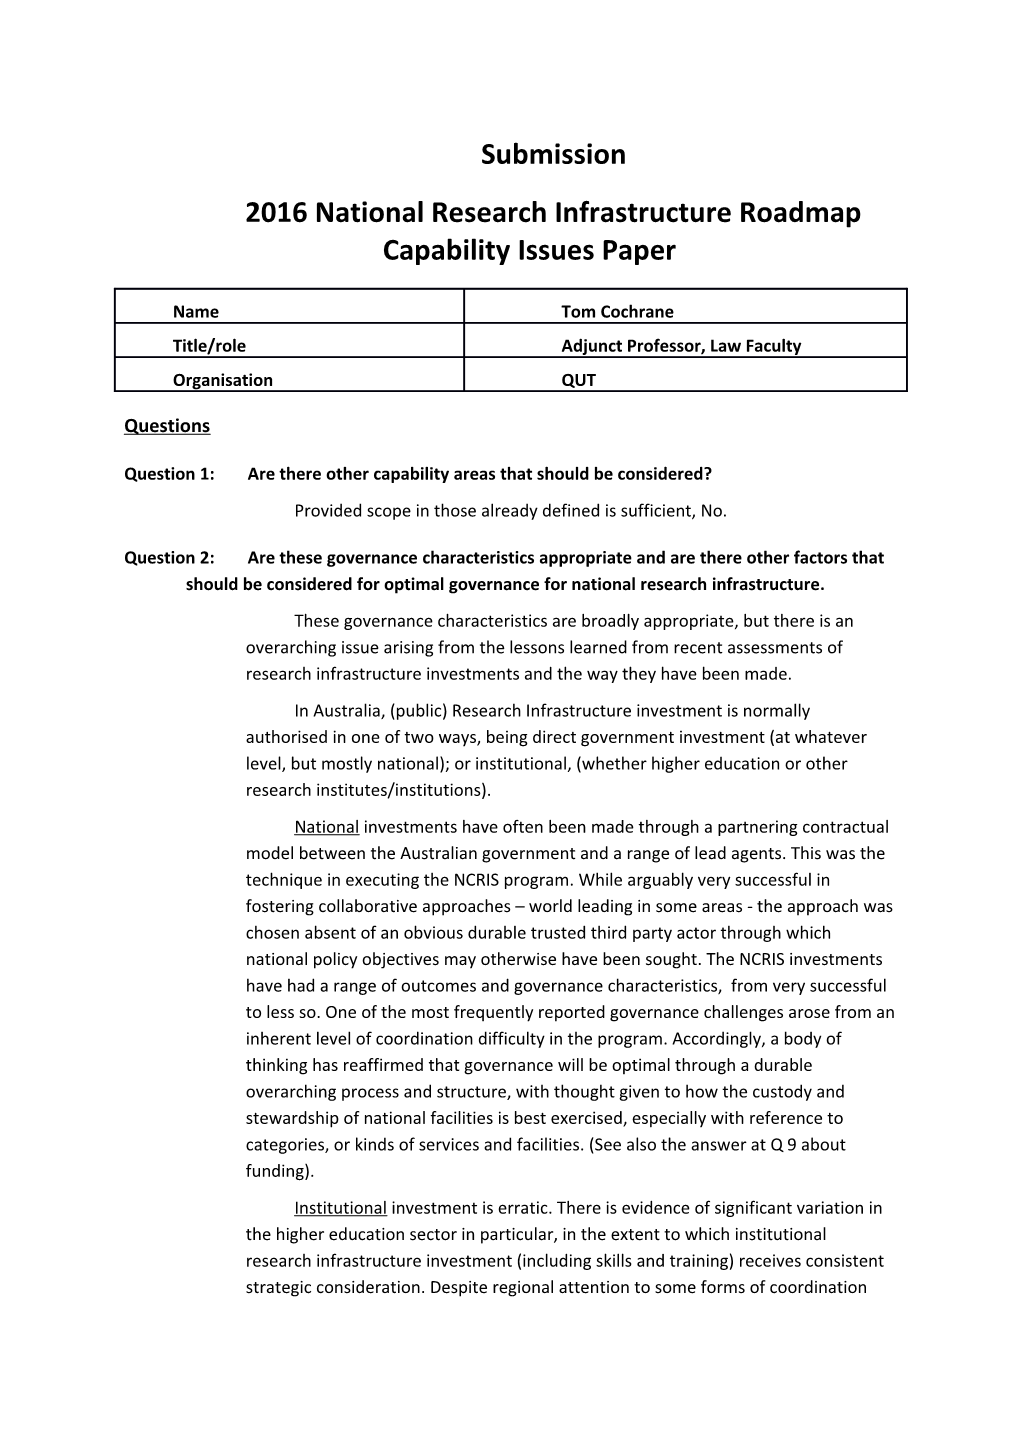 2016 National Research Infrastructure Roadmap Capability Issues Paper s1